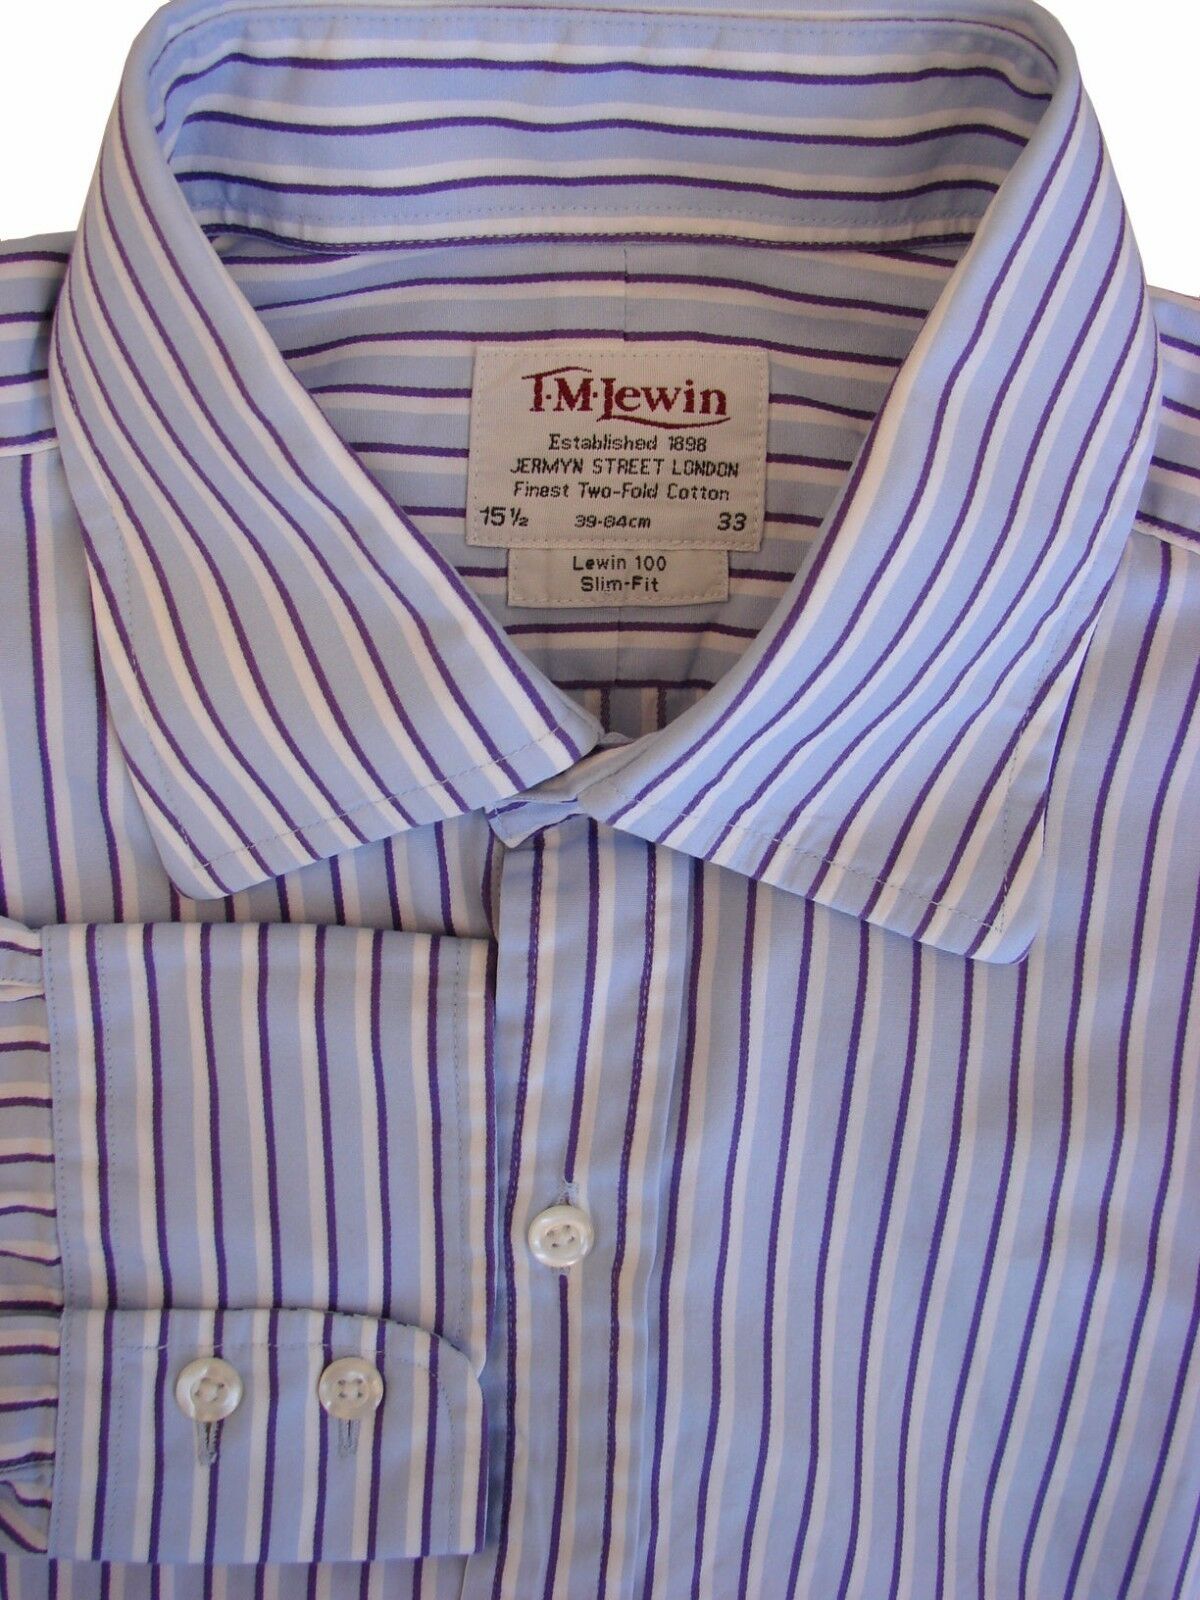 T.M.Lewin Down Shirts for Men